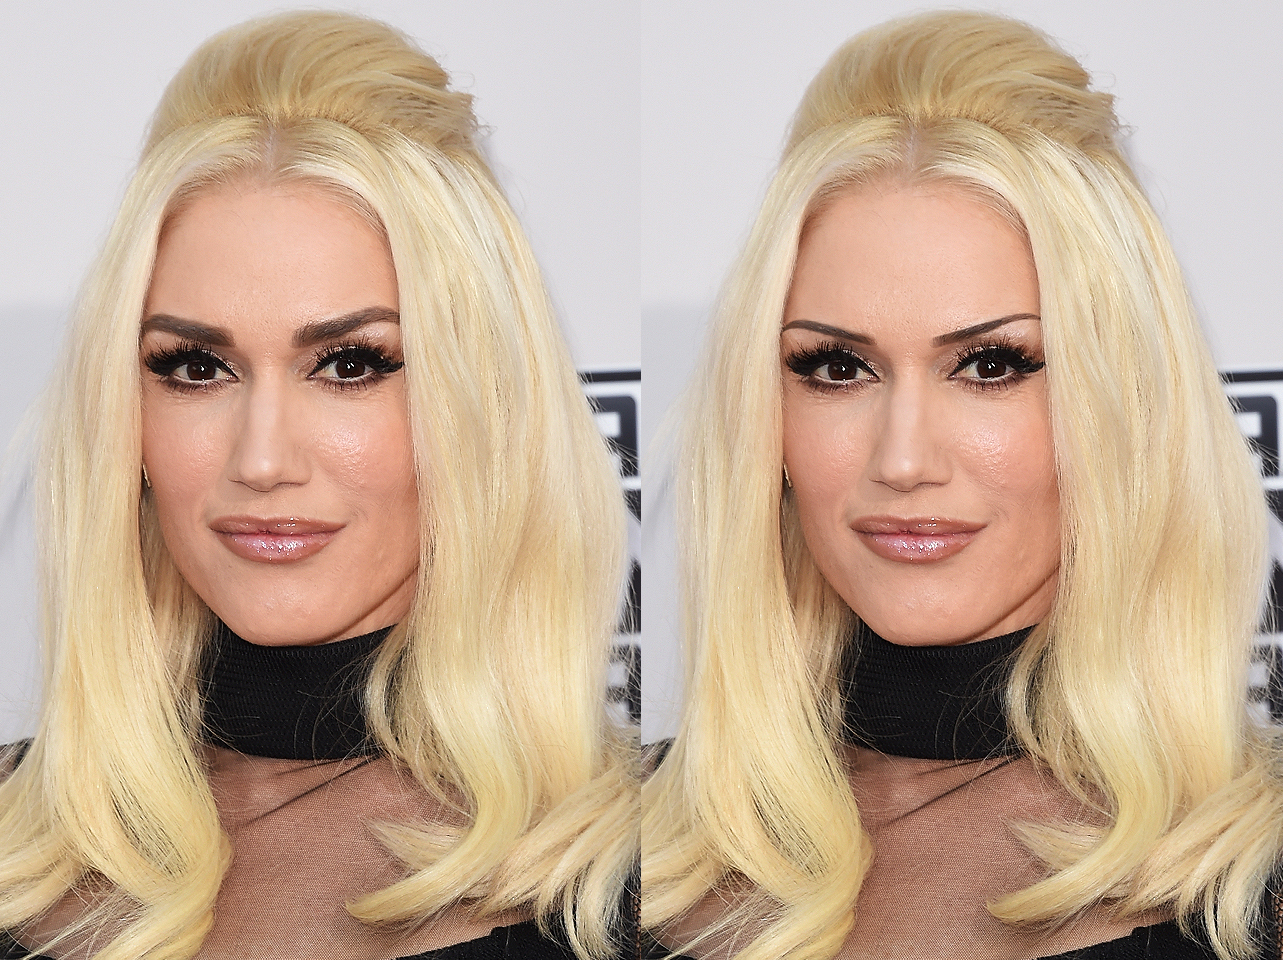 Gwen Stefani's signature brows from 2015 vs a digitally edited thin-brow look | Source: Getty Images